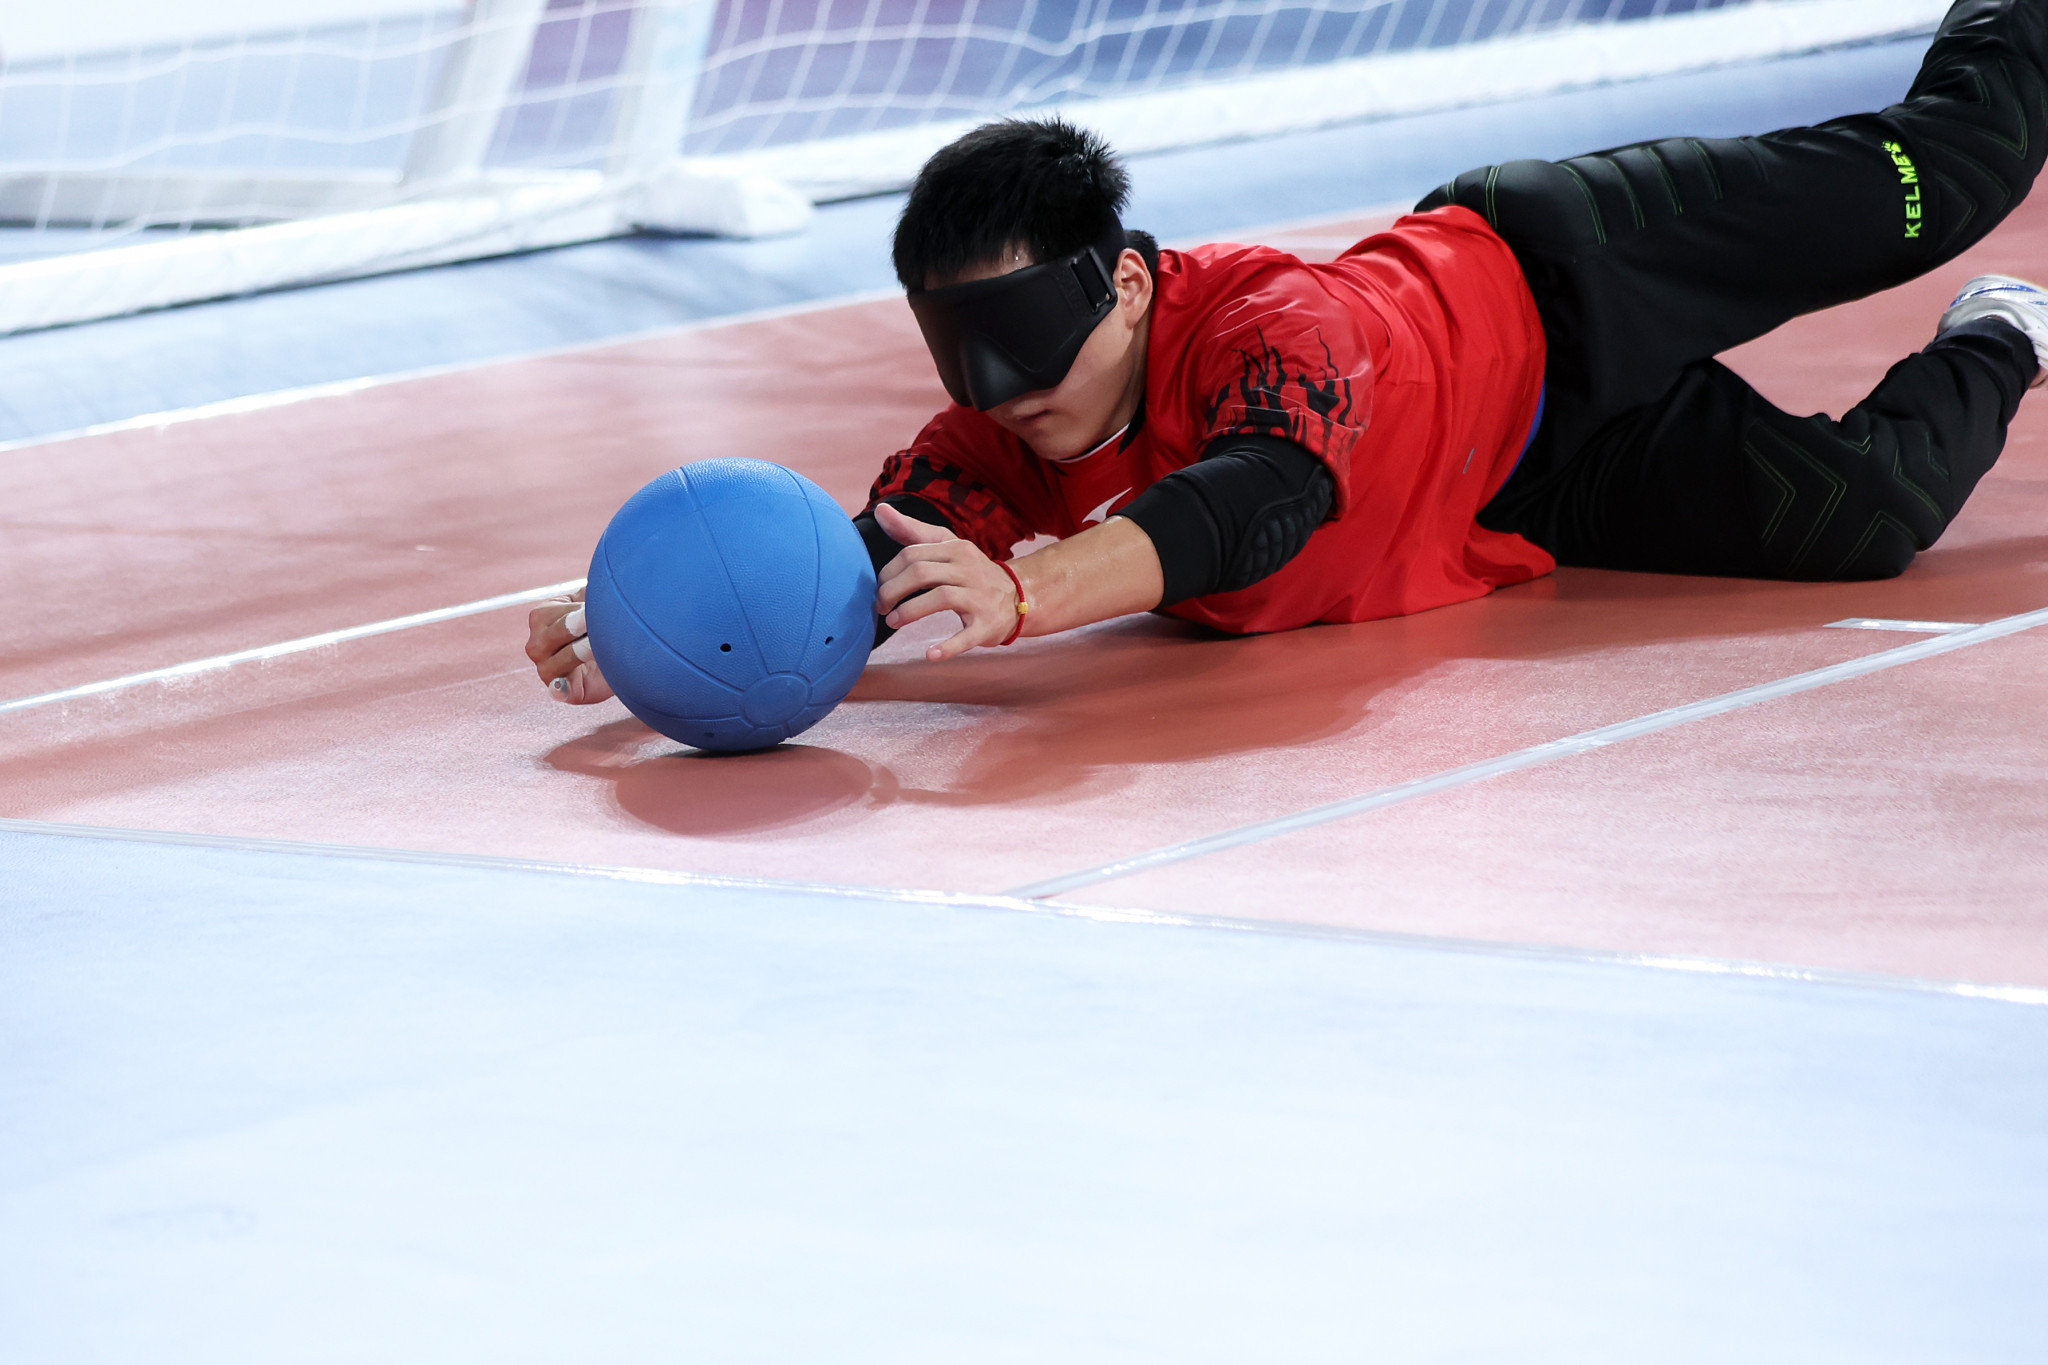 Postponed Asia-Pacific Goalball Championships set for March